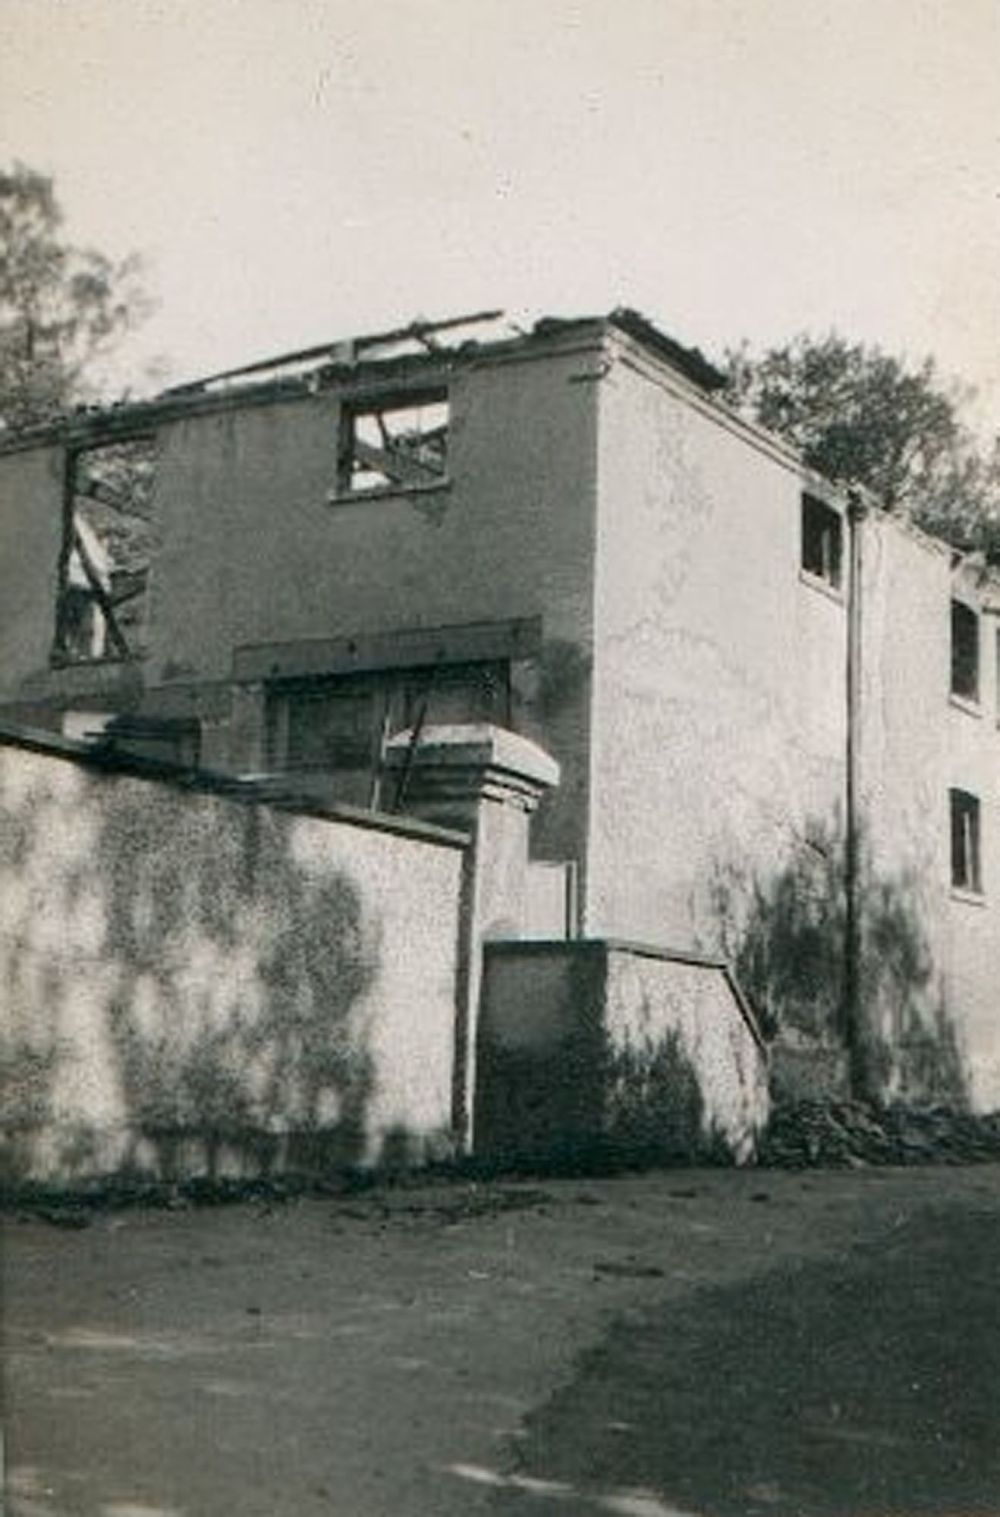 Nun Appleton Hall - 'Rec room' (later theatre) after major fire